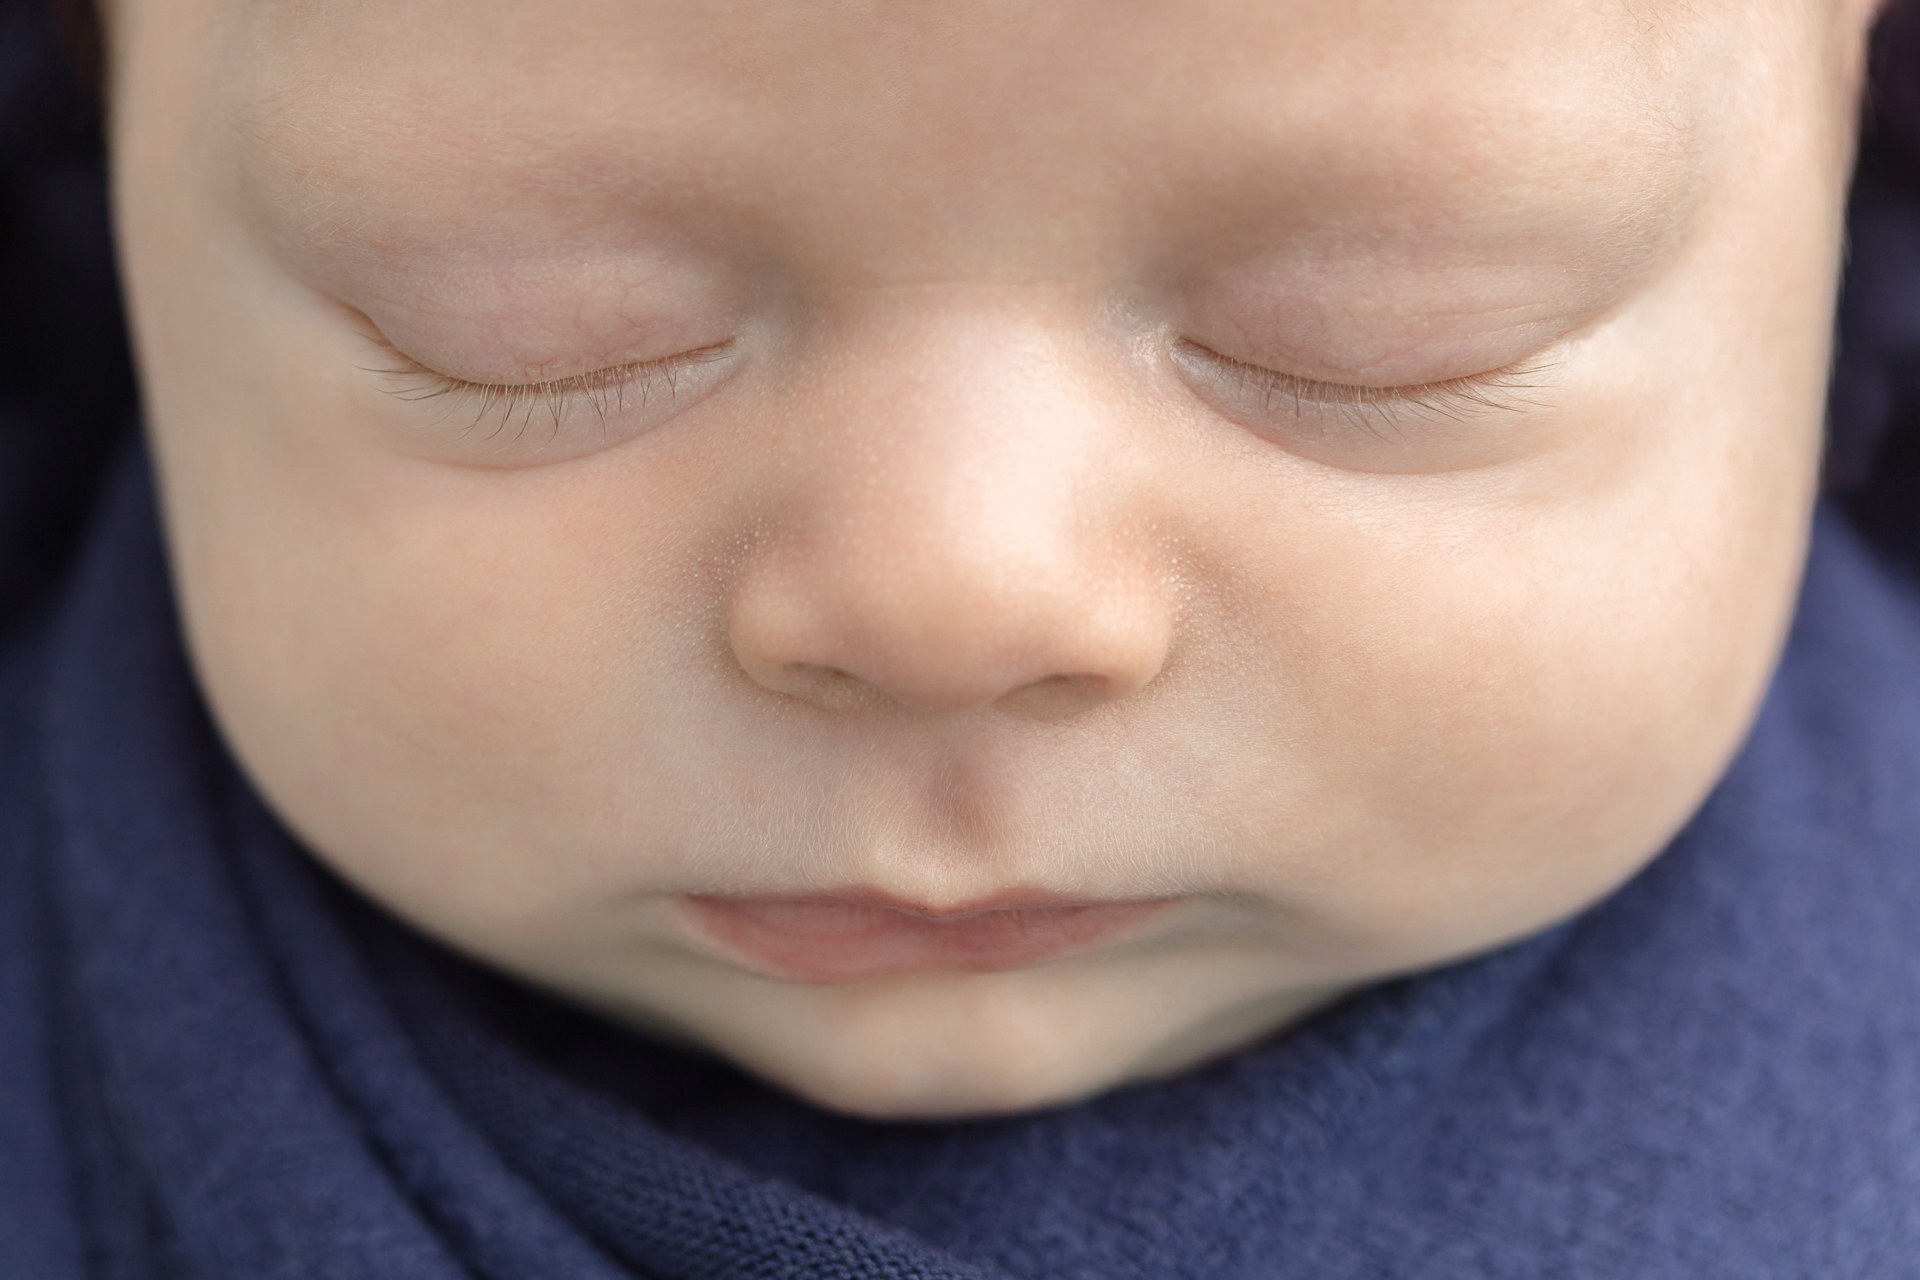 close up features of a newborn baby's face, eyes, nose, lips; baby wrapped in a navy swaddle